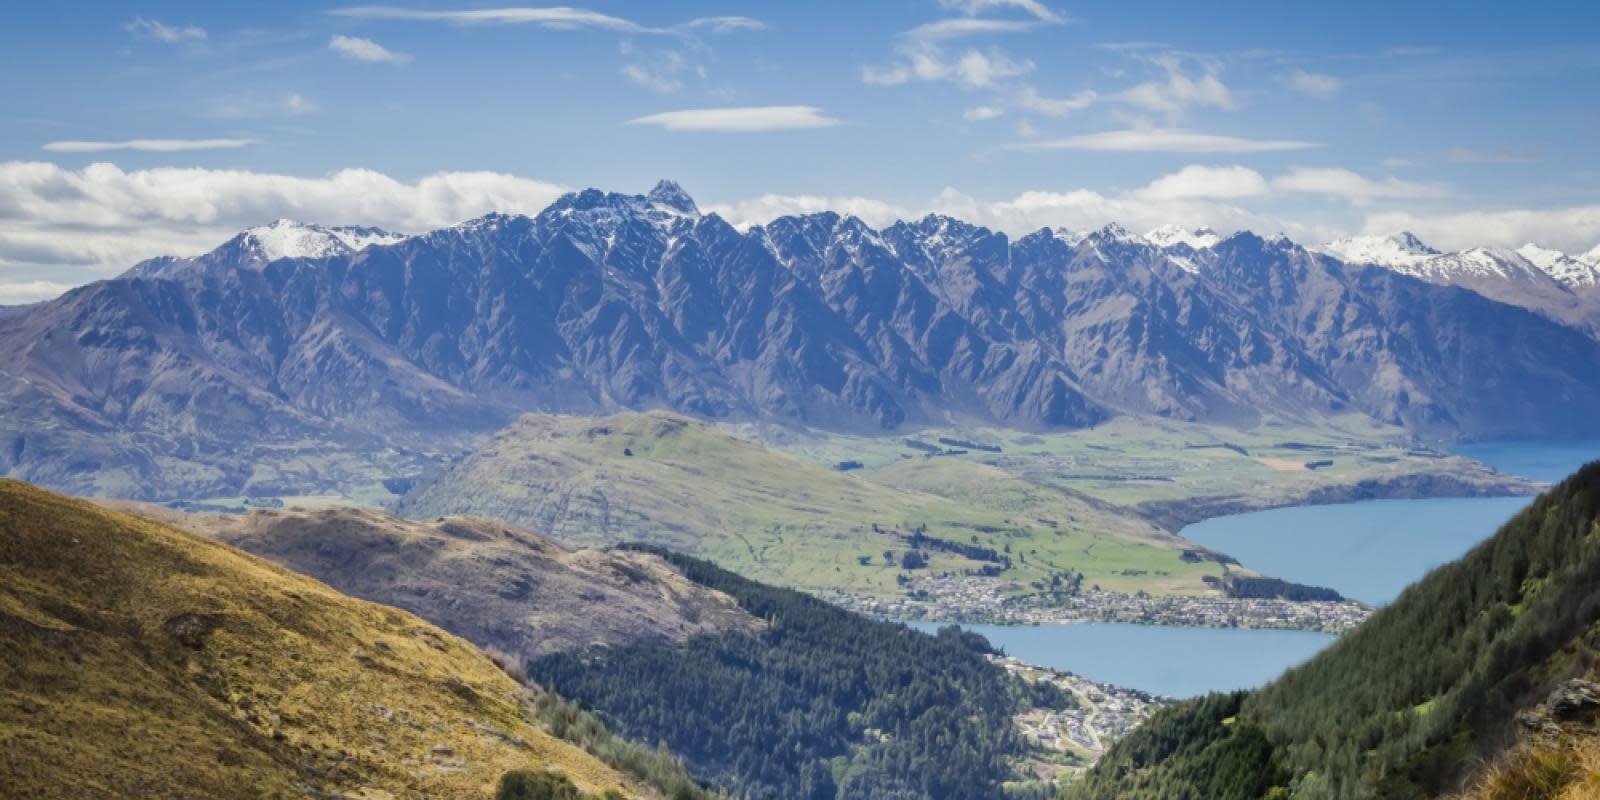 The Remarkables mountains